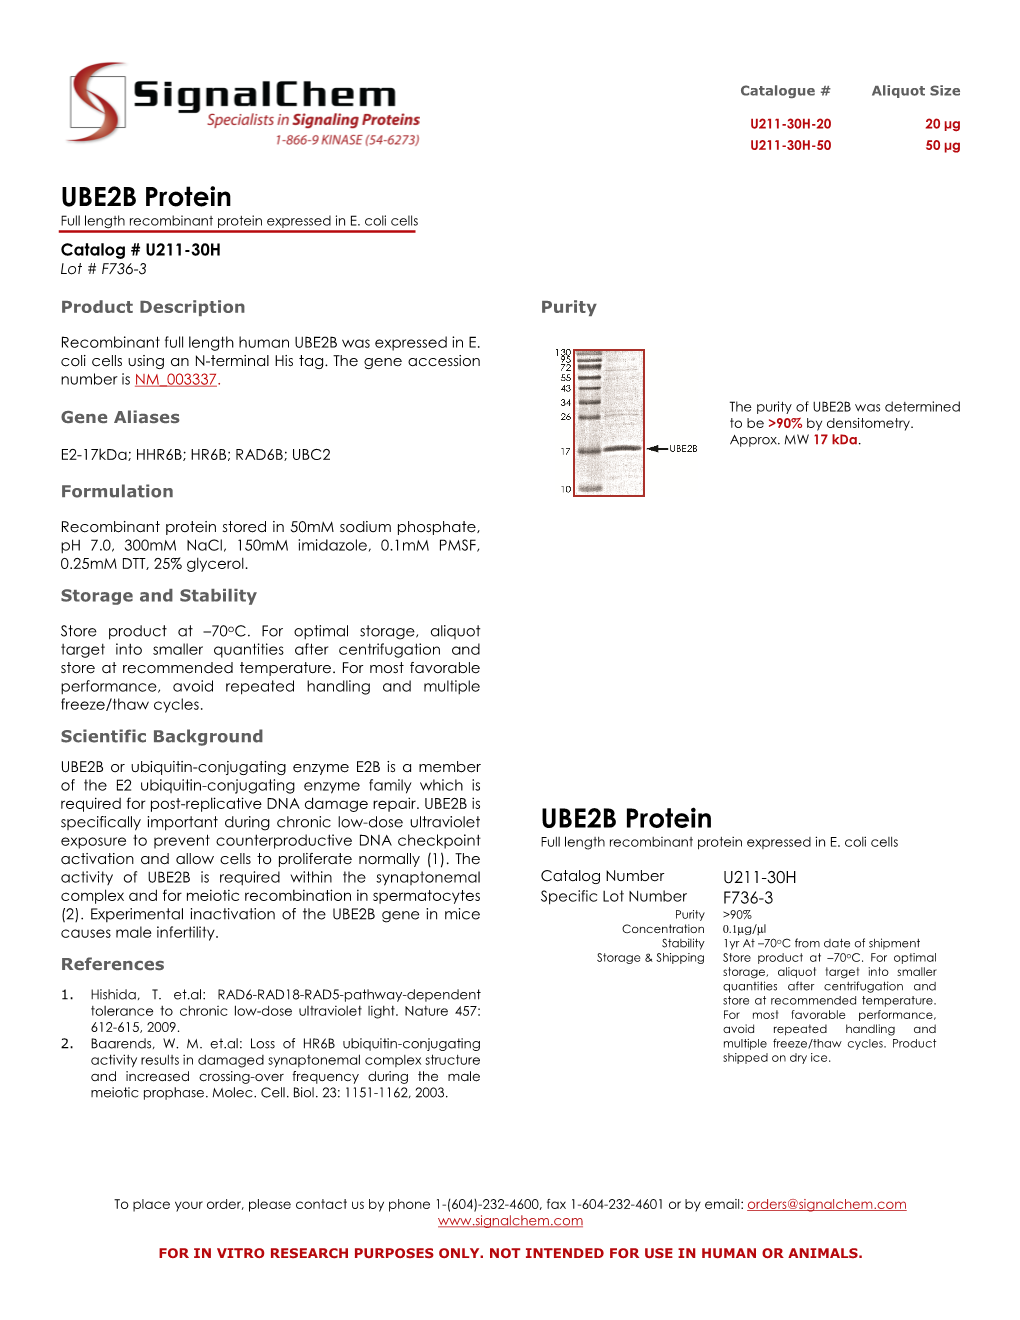 UBE2B Protein Full Length Recombinant Protein Expressed in E